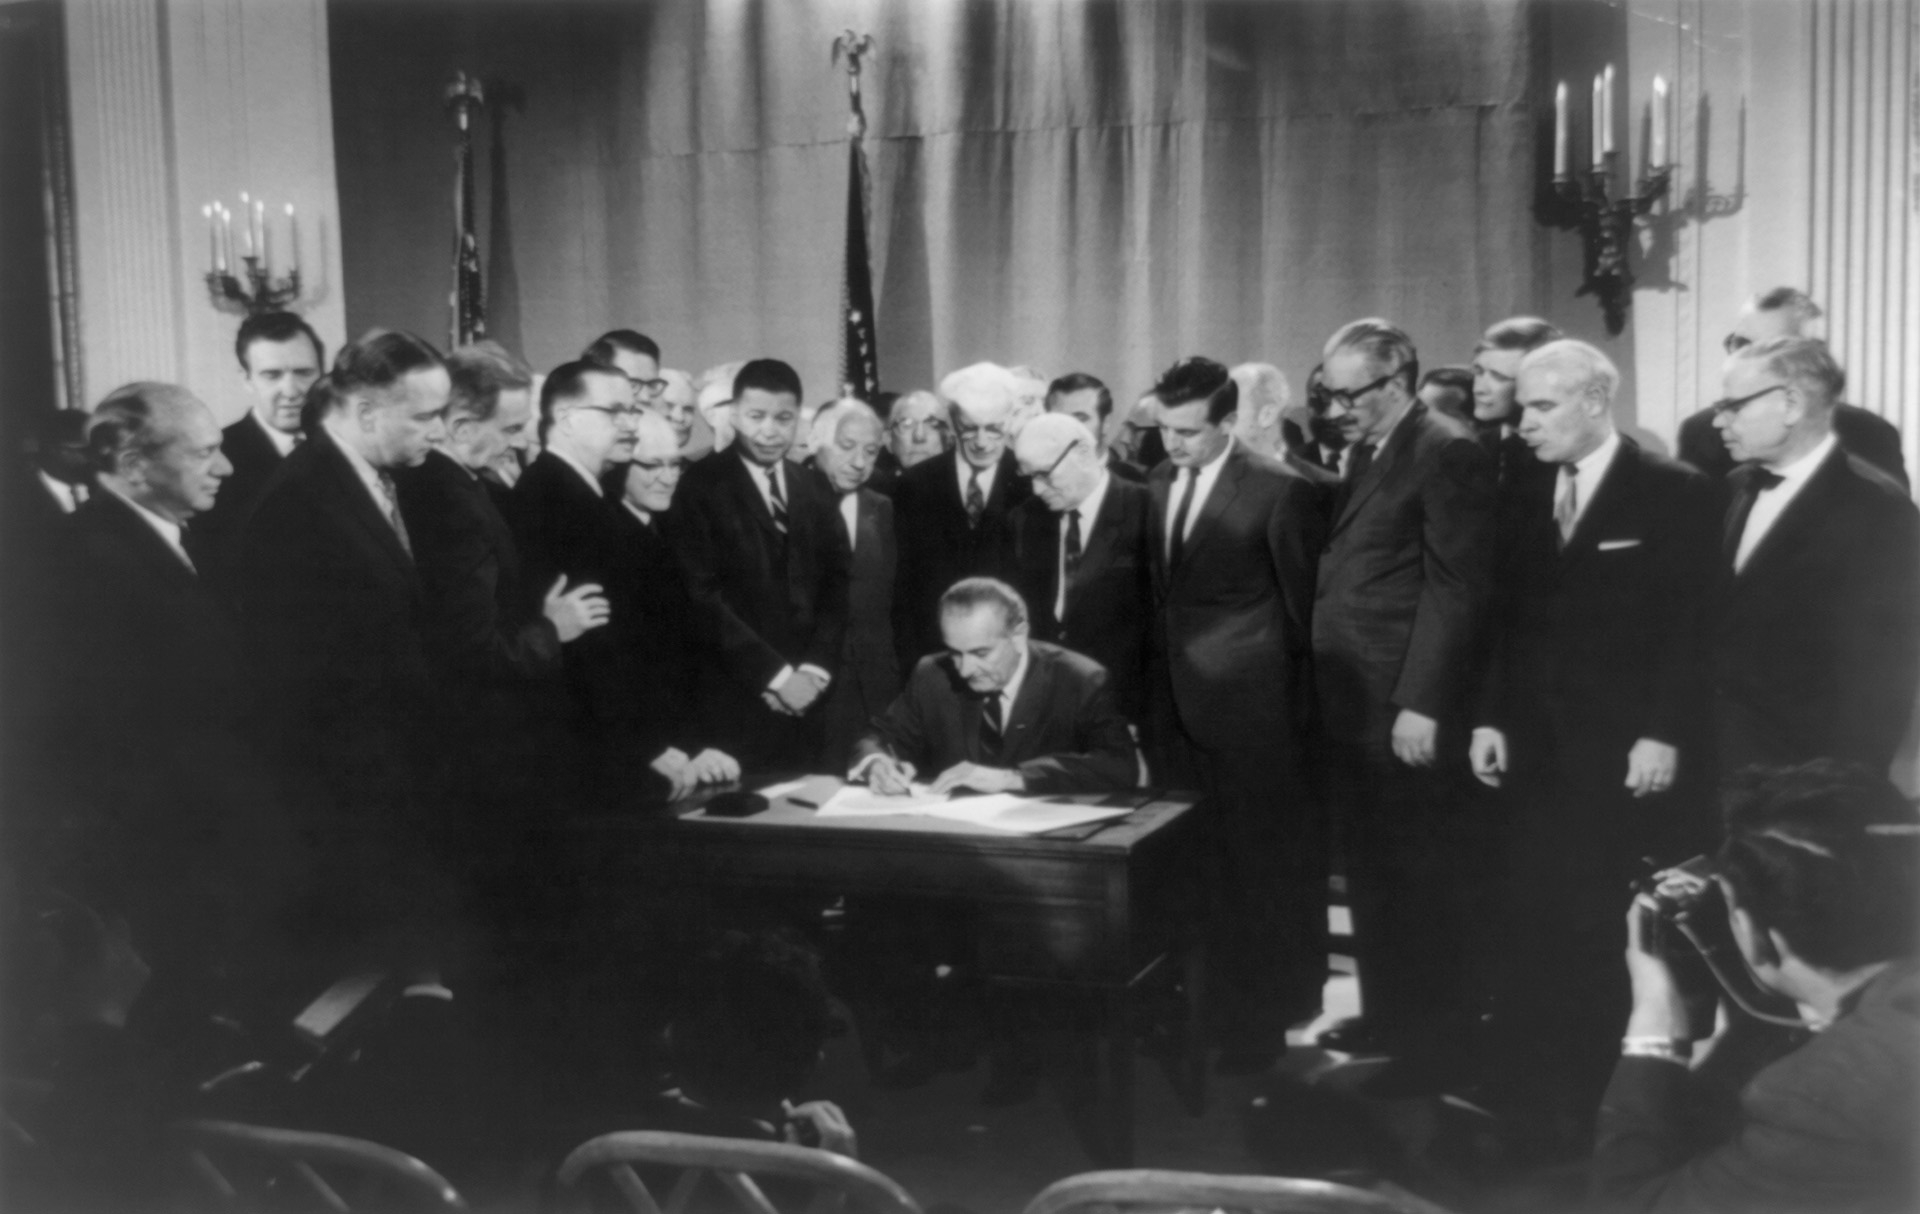 Congress had considered fair housing during 1966-1967, only to have it locked in contentious debate. On April 5, the day after Dr. Martin Luther King, Jr.’s assassination, President Lyndon B. Johnson sent a letter to the Speaker of the House asking to bring him the legislation which Johnson signed on April 11, 1968.